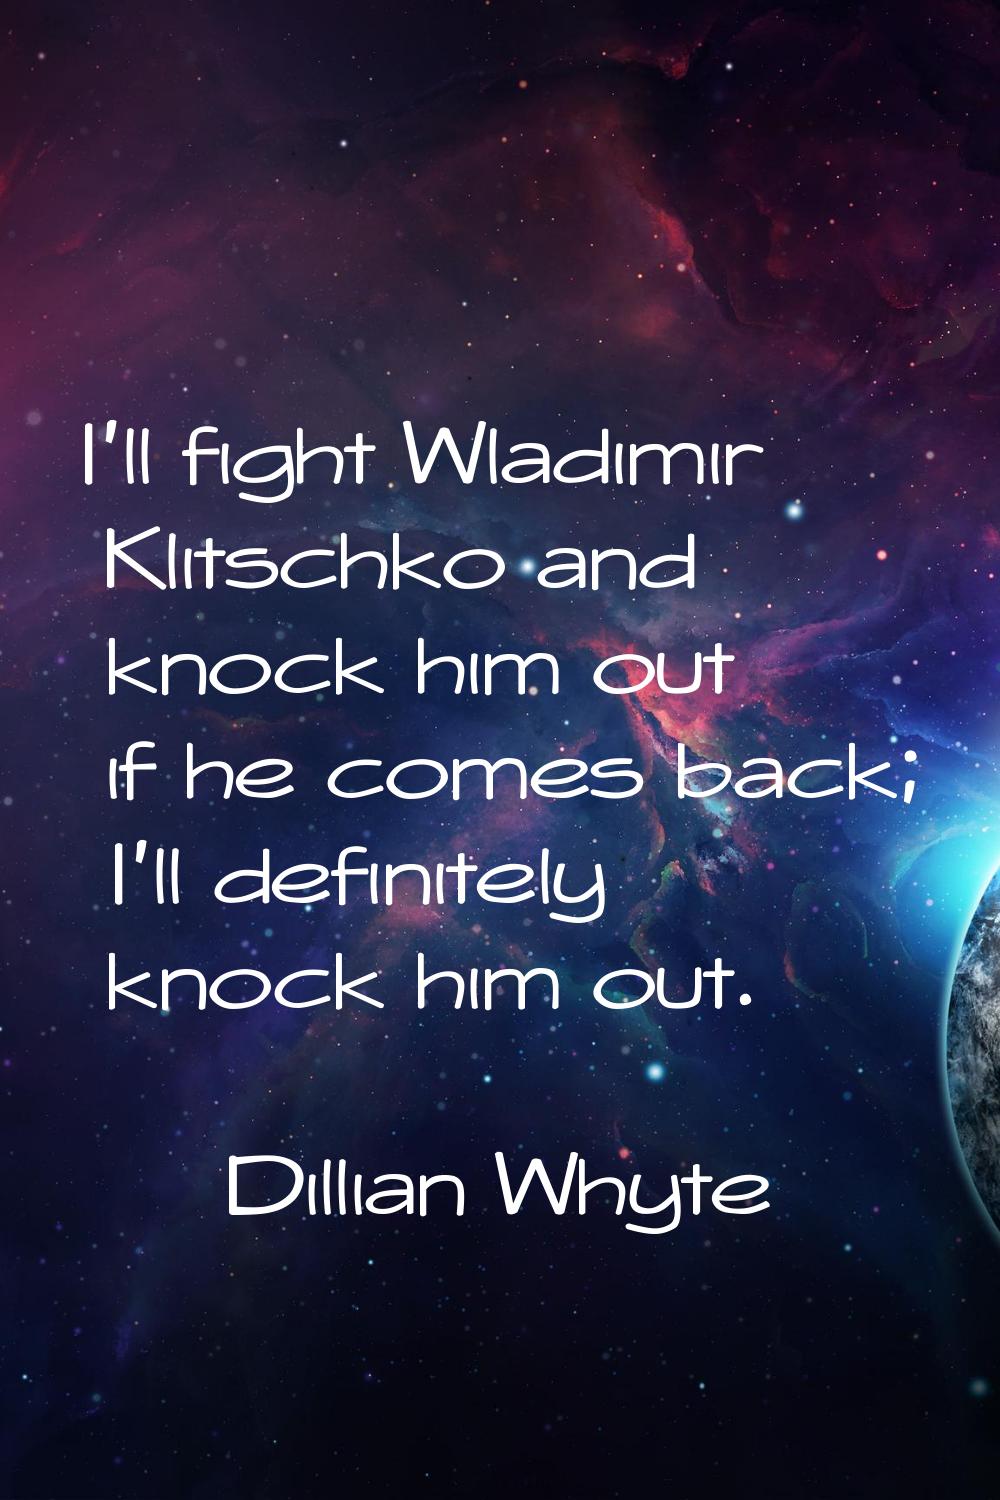 I'll fight Wladimir Klitschko and knock him out if he comes back; I'll definitely knock him out.